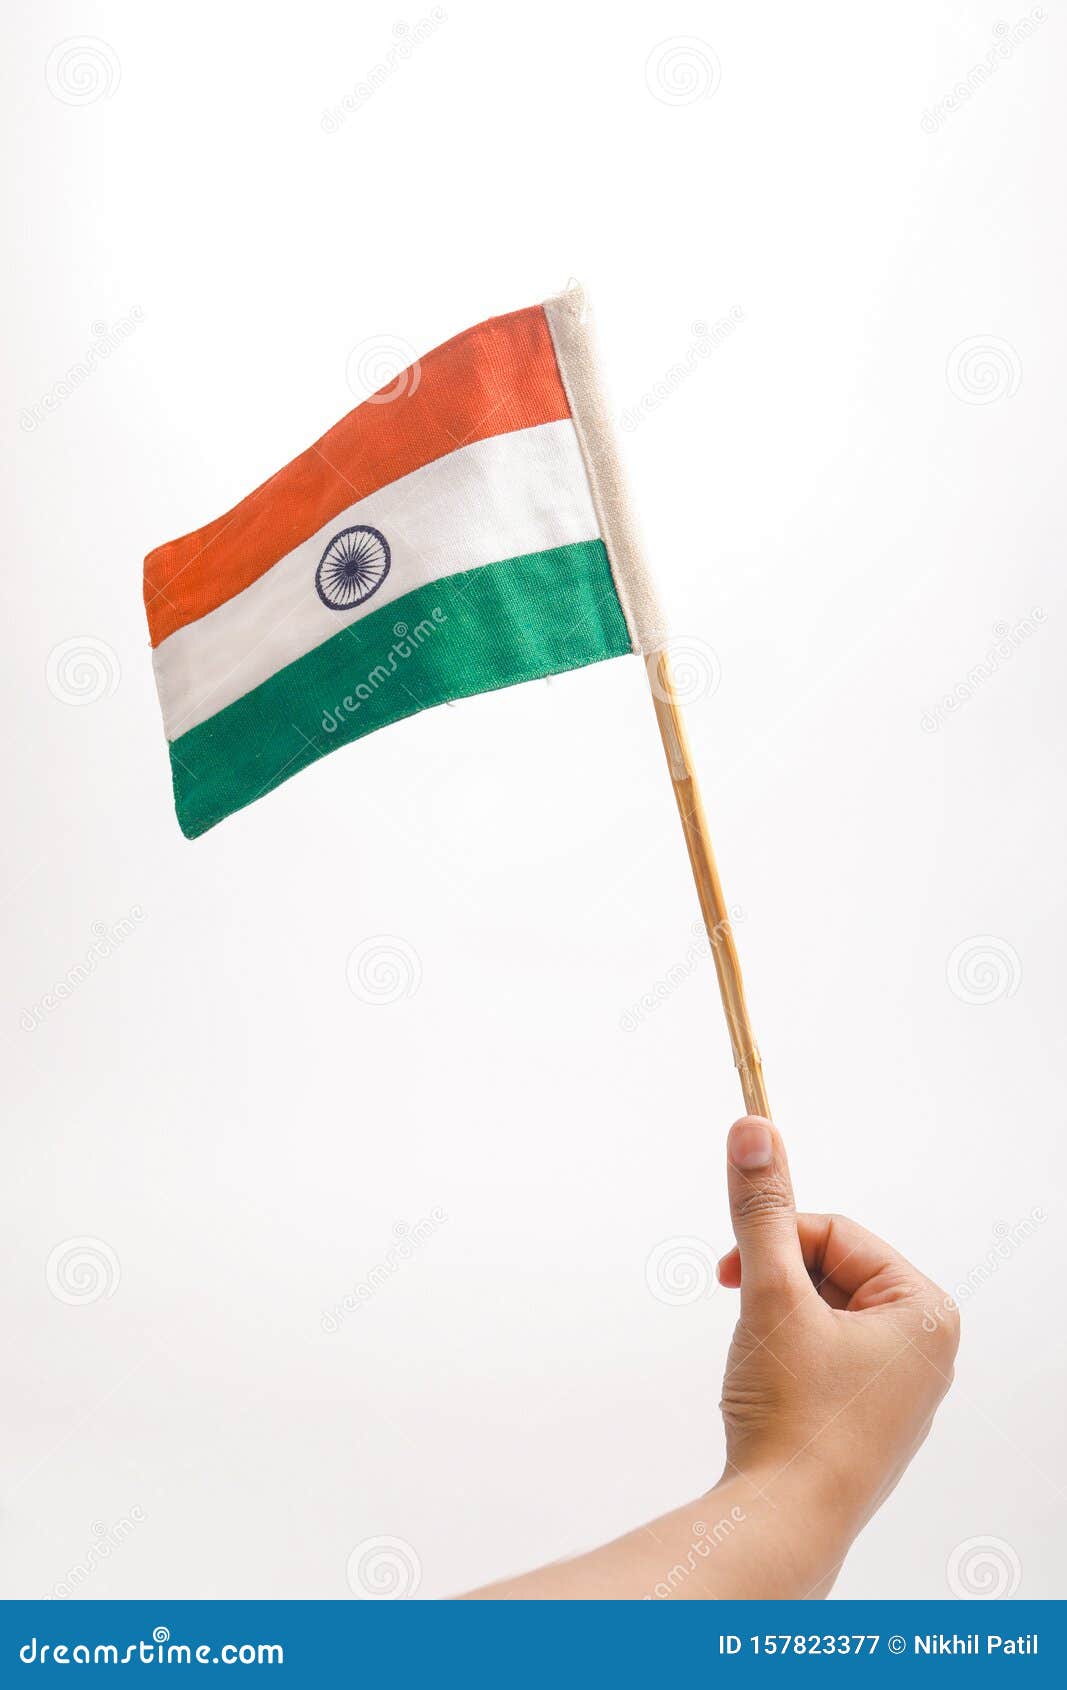 Indian Tricolor Flag Over White Background Stock Image - Image of flags,  freedom: 157823377